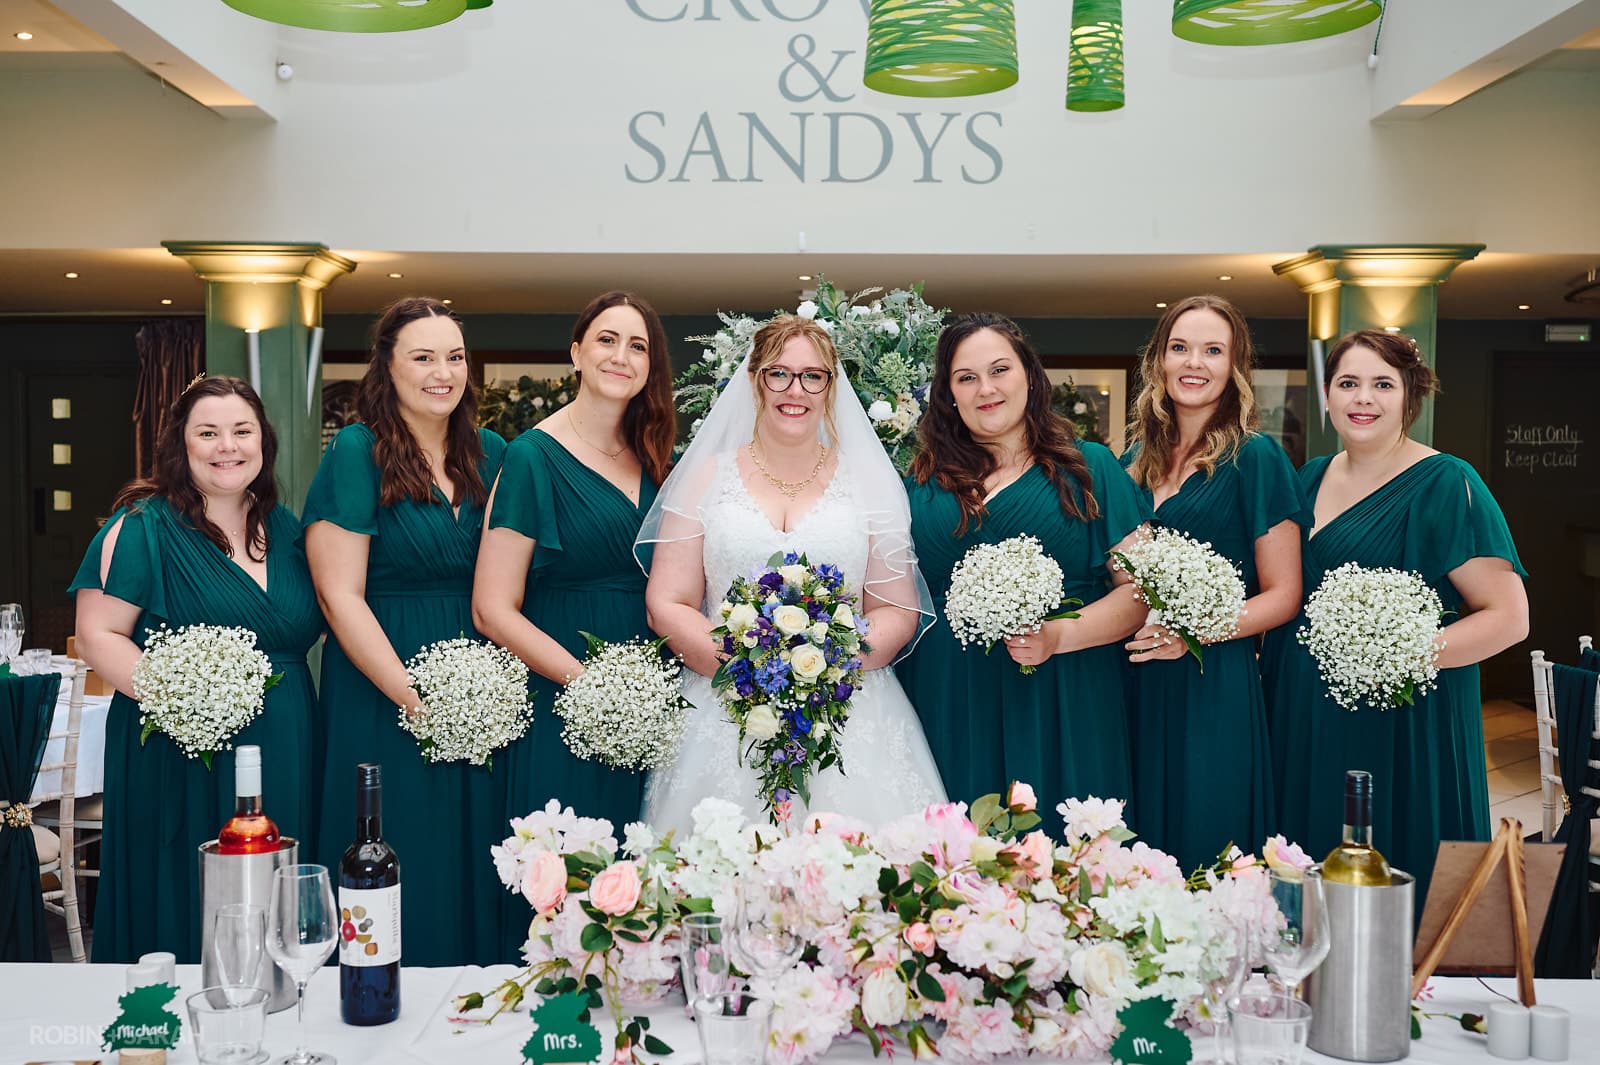 Wedding group photo of bride and bridesmaids at The Crown and Sandys.